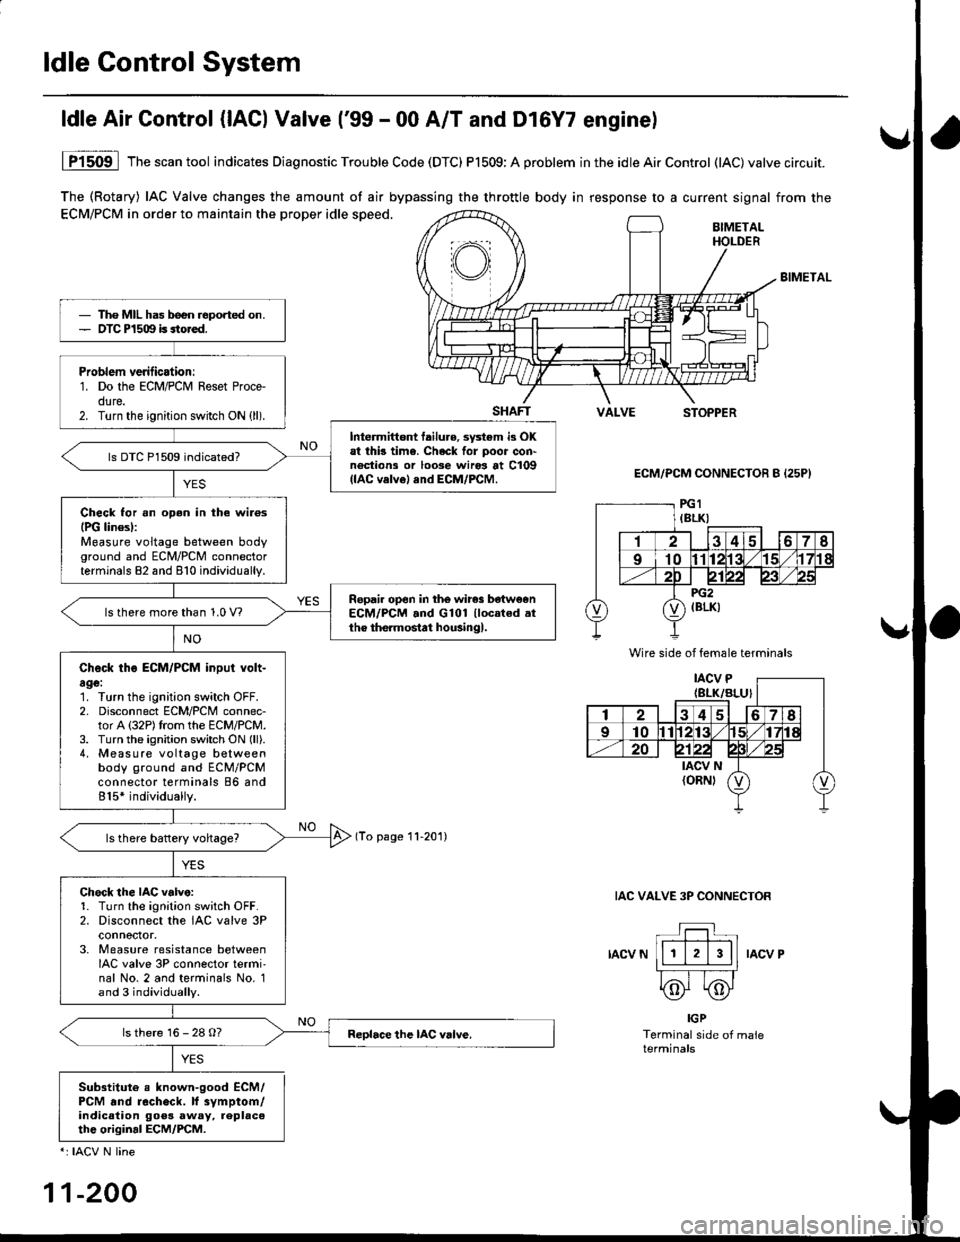 HONDA CIVIC 1996 6.G Workshop Manual ldle Gontrol System
The (Rotary) IAC Valve changes the amount of air bypassing the throttle body in response to a current signal from the
ECM/PCM in order to maintain the proper idle speed.BIMETALHOLD